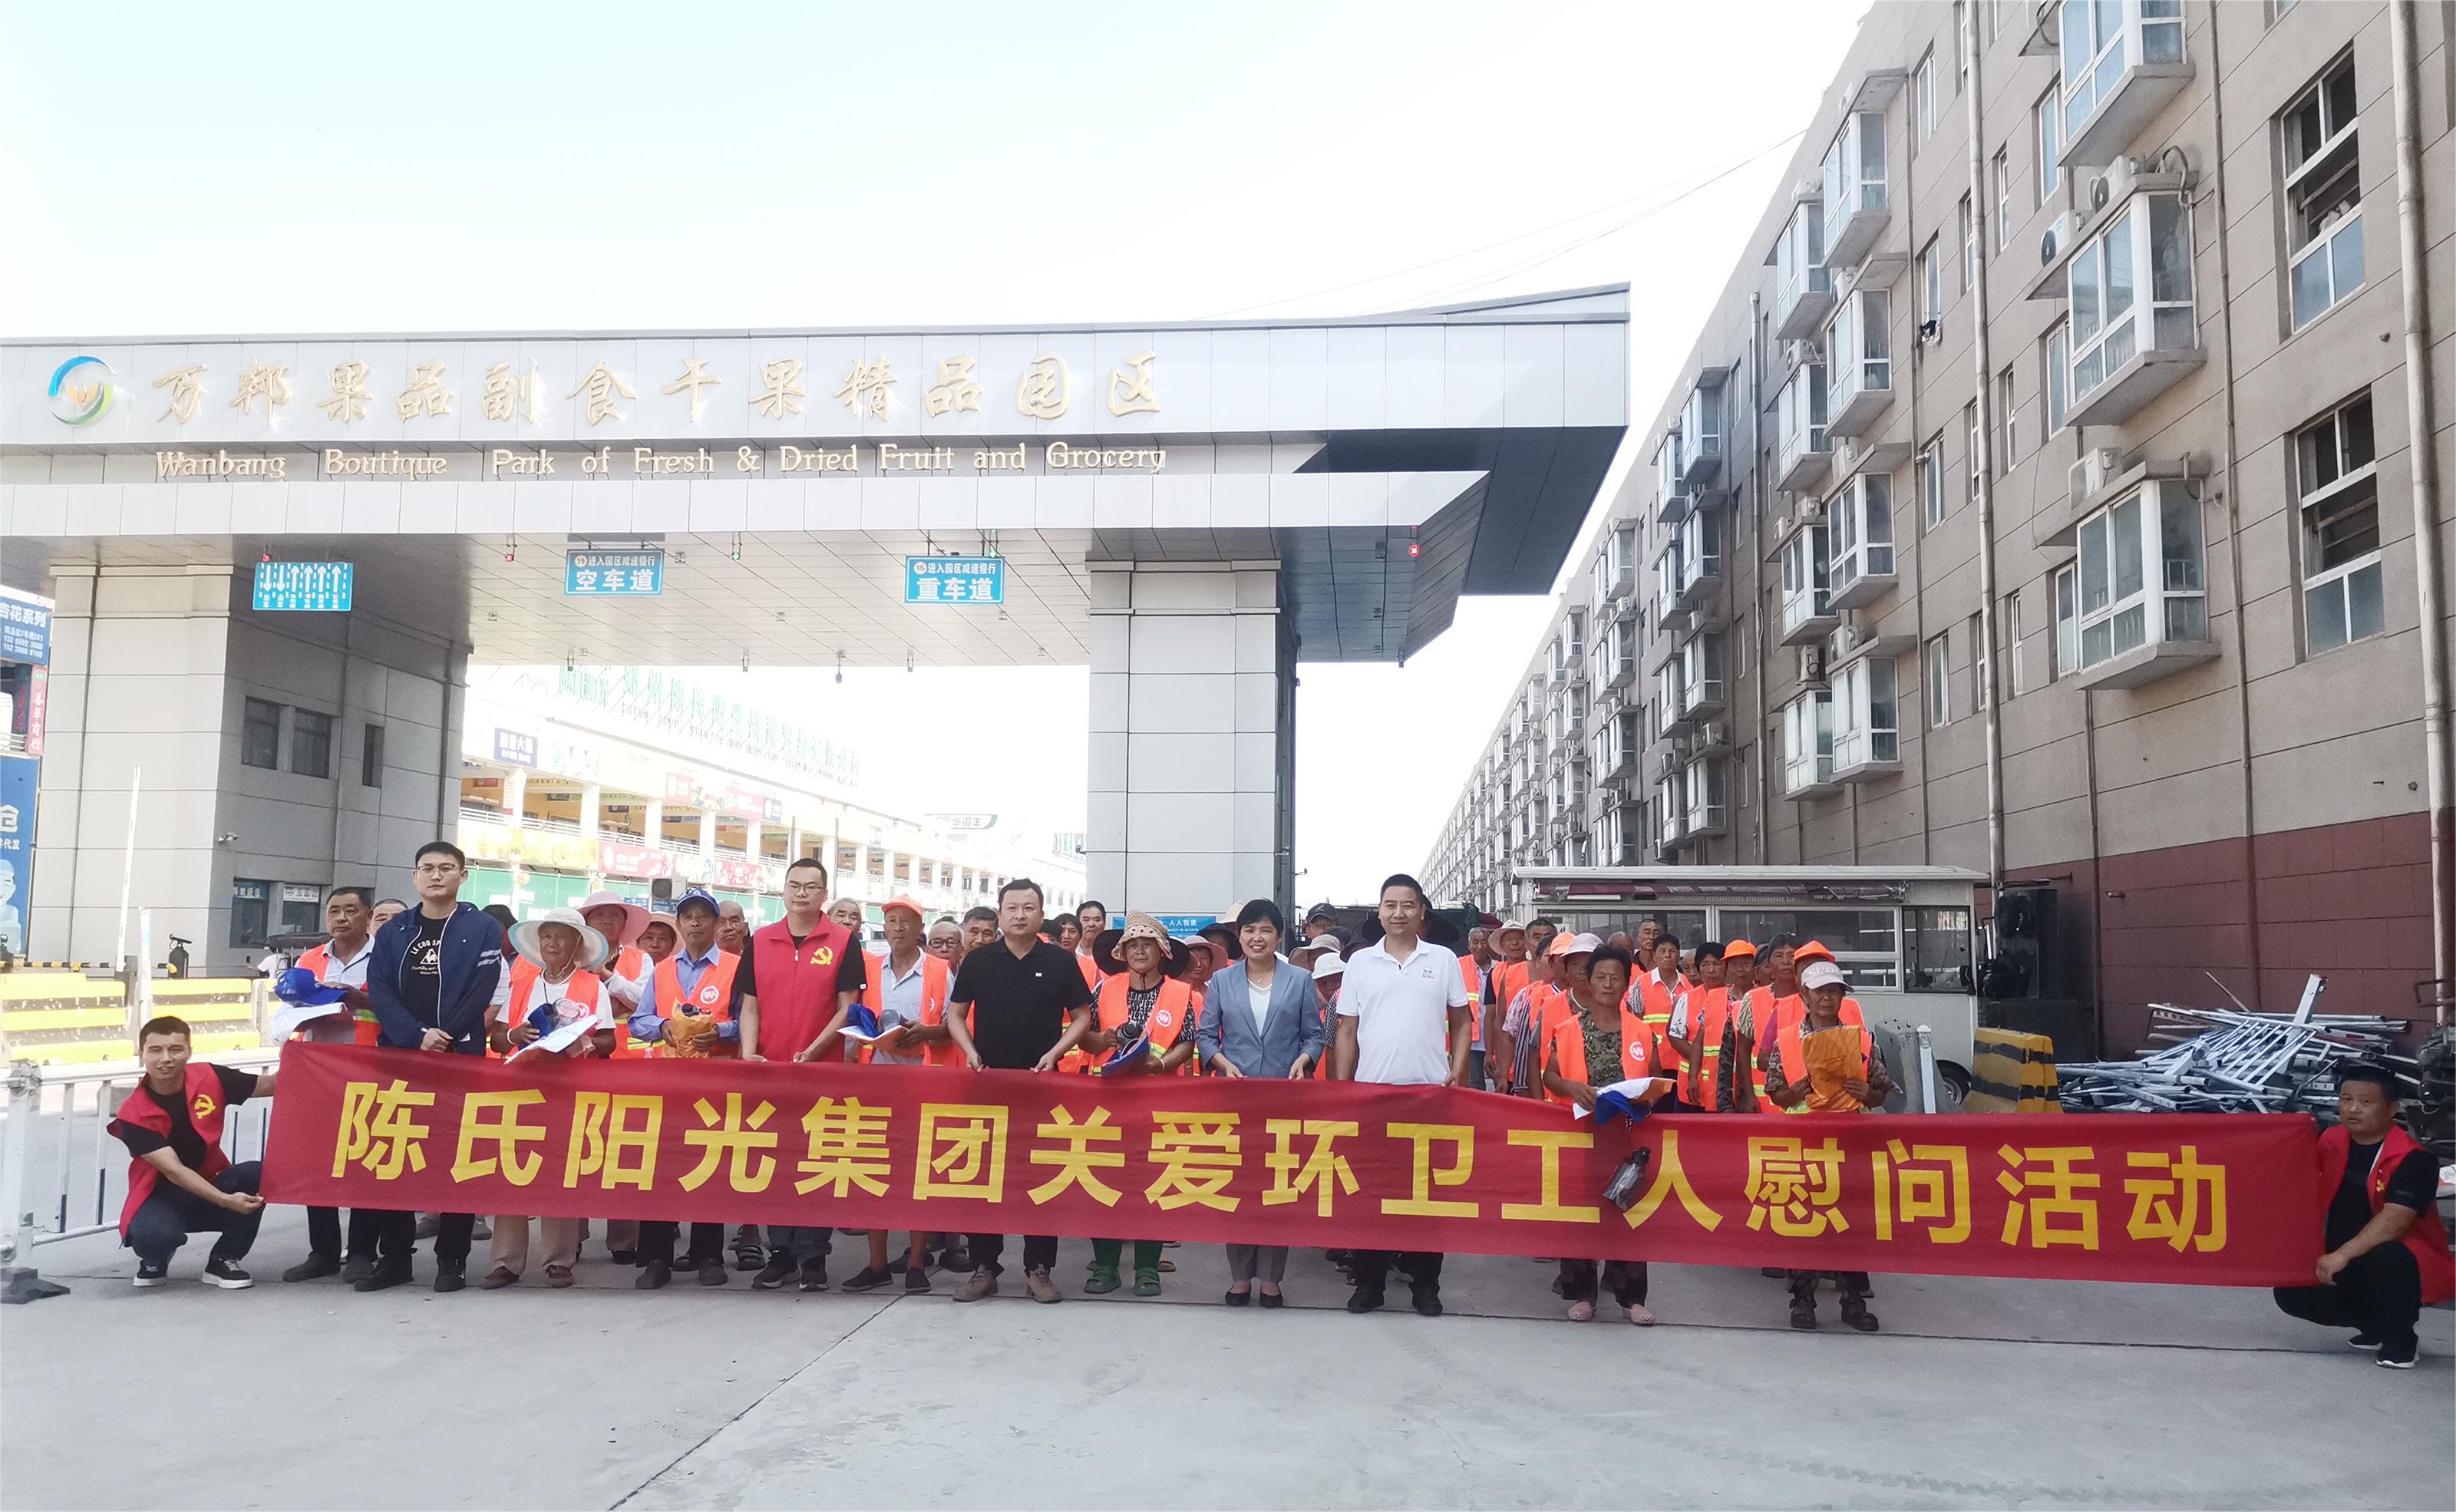 Caring for the sanitation workers in the hot summer and giving them cool air -- Chen's Sun Group carried out public welfare activities to console the front-line Sanitation worker